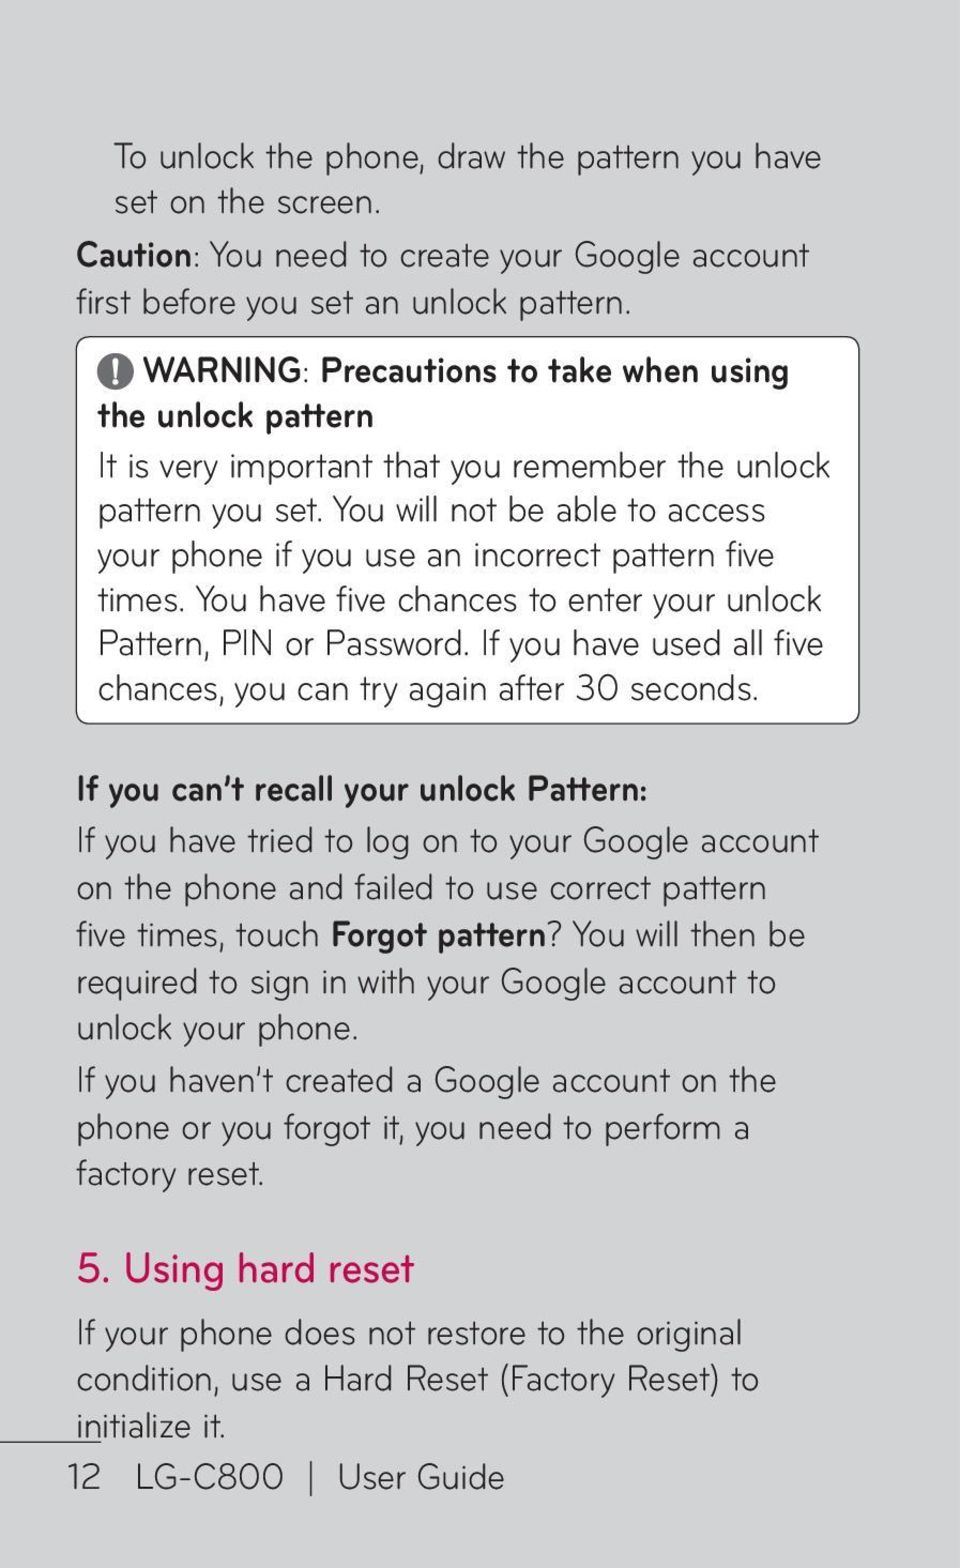 You will not be able to access your phone if you use an incorrect pattern five times. You have five chances to enter your unlock Pattern, PIN or Password.